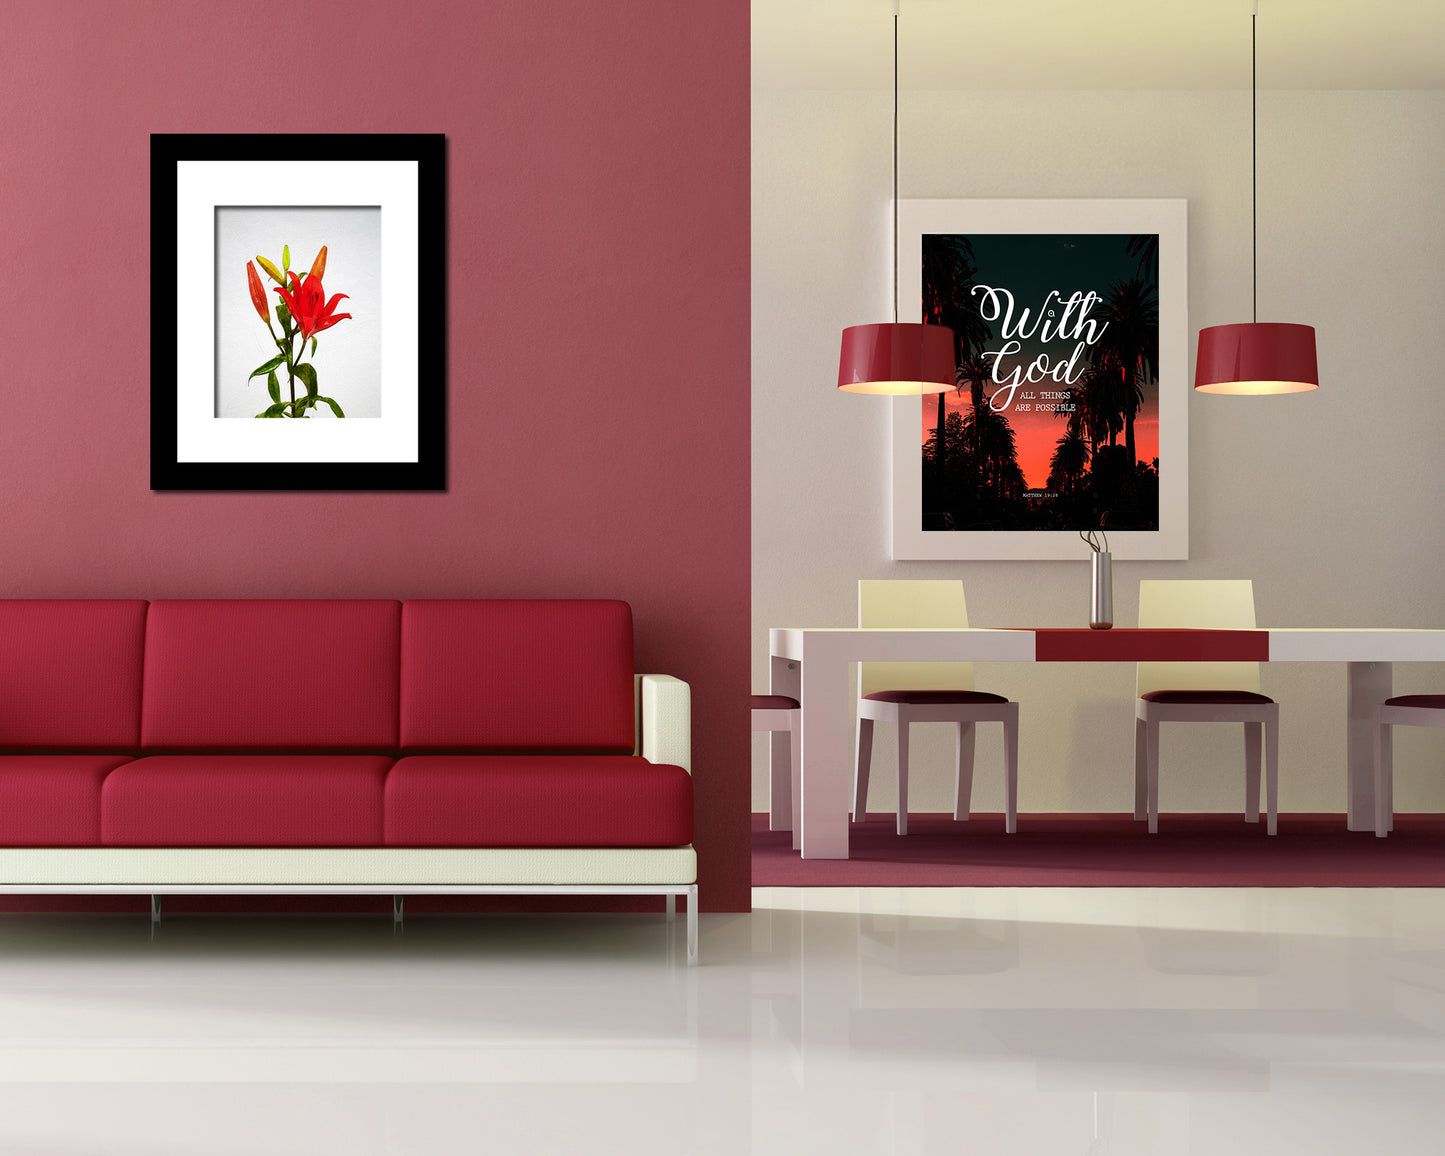 Red Lily Sketch Plants Art Wood Framed Print Wall Decor Gifts